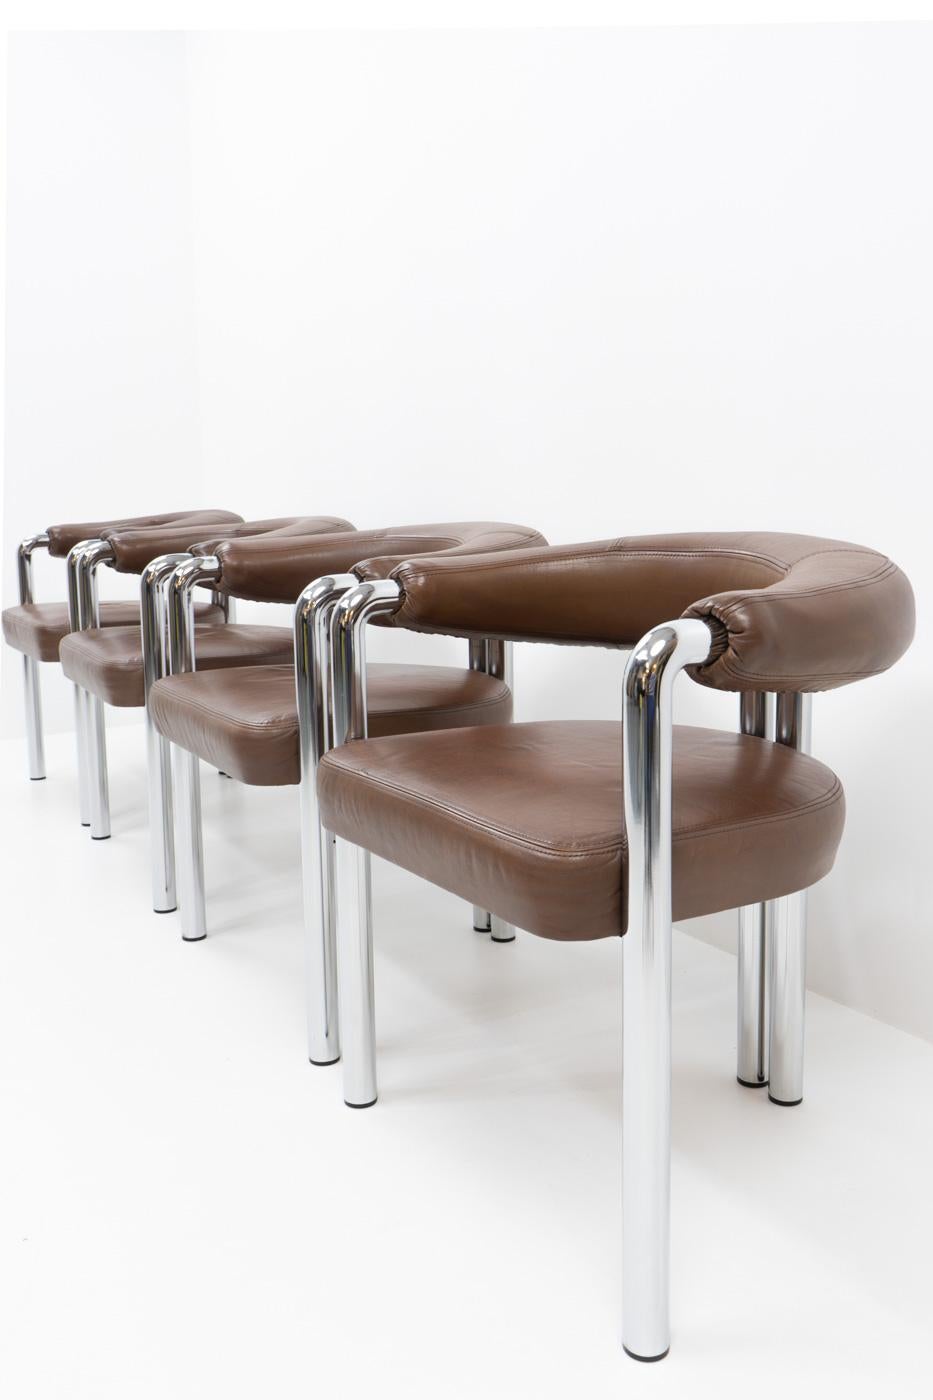 Late 20th Century De Sede Dining Chairs by Nienkamper in Brown Leather, 1980s For Sale